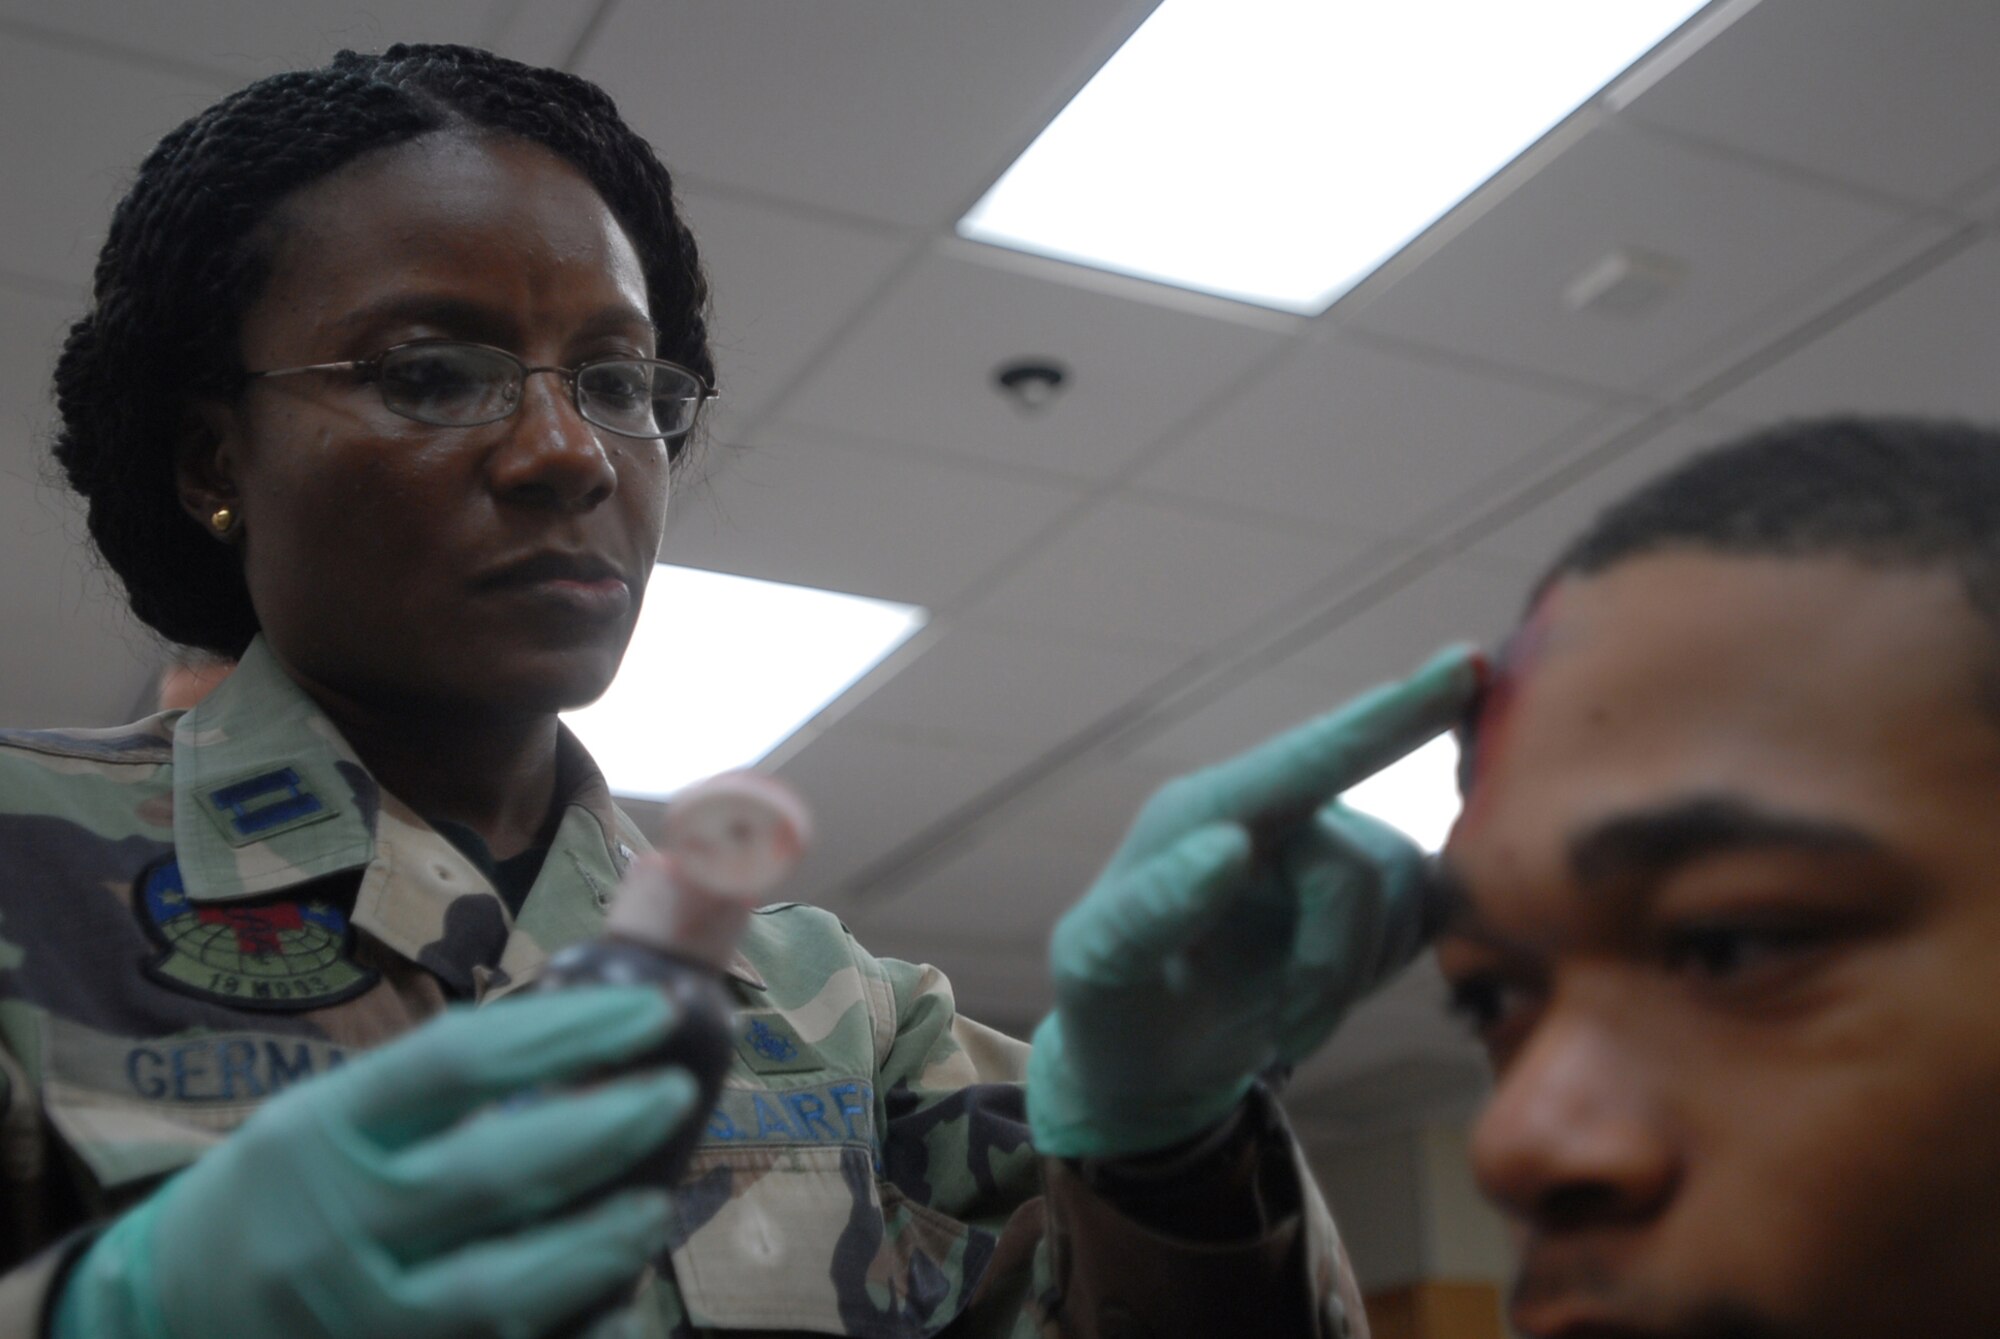 Capt. Mickaelle Germain, 18th Medical Operations Squadron, applies moulage to the head of Airman Basic Lemar Mayberry, 18th Component Maintence Squadron, to simulate a wound during an exercise scenario at Kadena Air Base, Japan, Oct. 24, 2007.  Moulaged "victims" provide more realism to exercise scenarios. The Airmen are supporting training missions based on real-world scenarios as part of Local Operational Readiness Exercise Beverly High 08-1. (U.S. Air Force photo/Senior Airman Darnell T. Cannady)